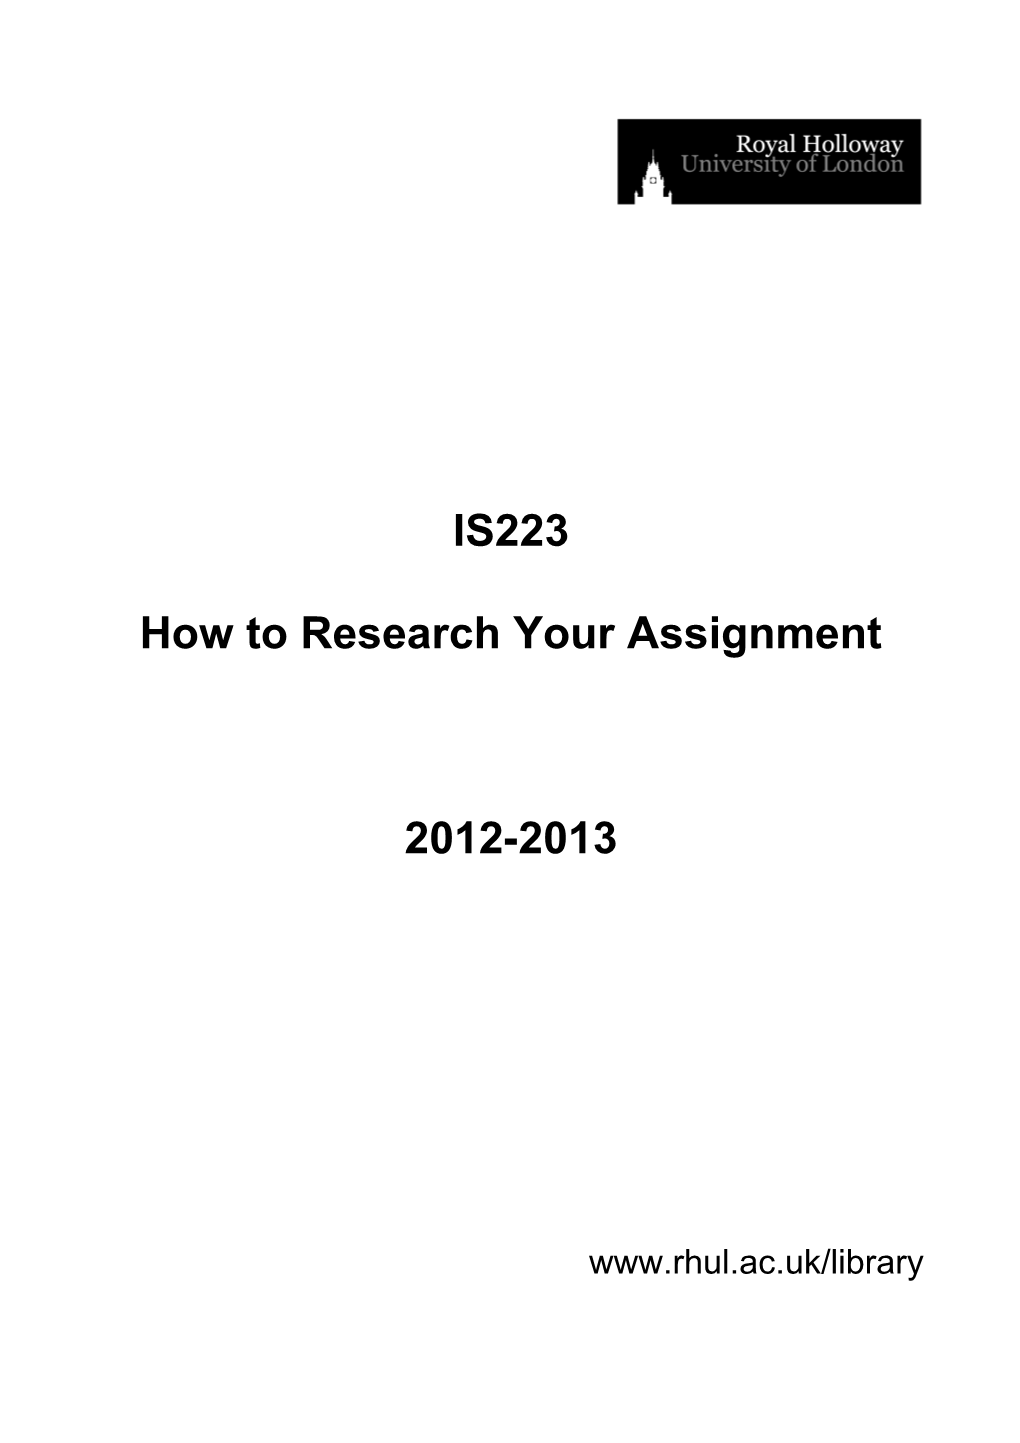 How to Research Your Assignment